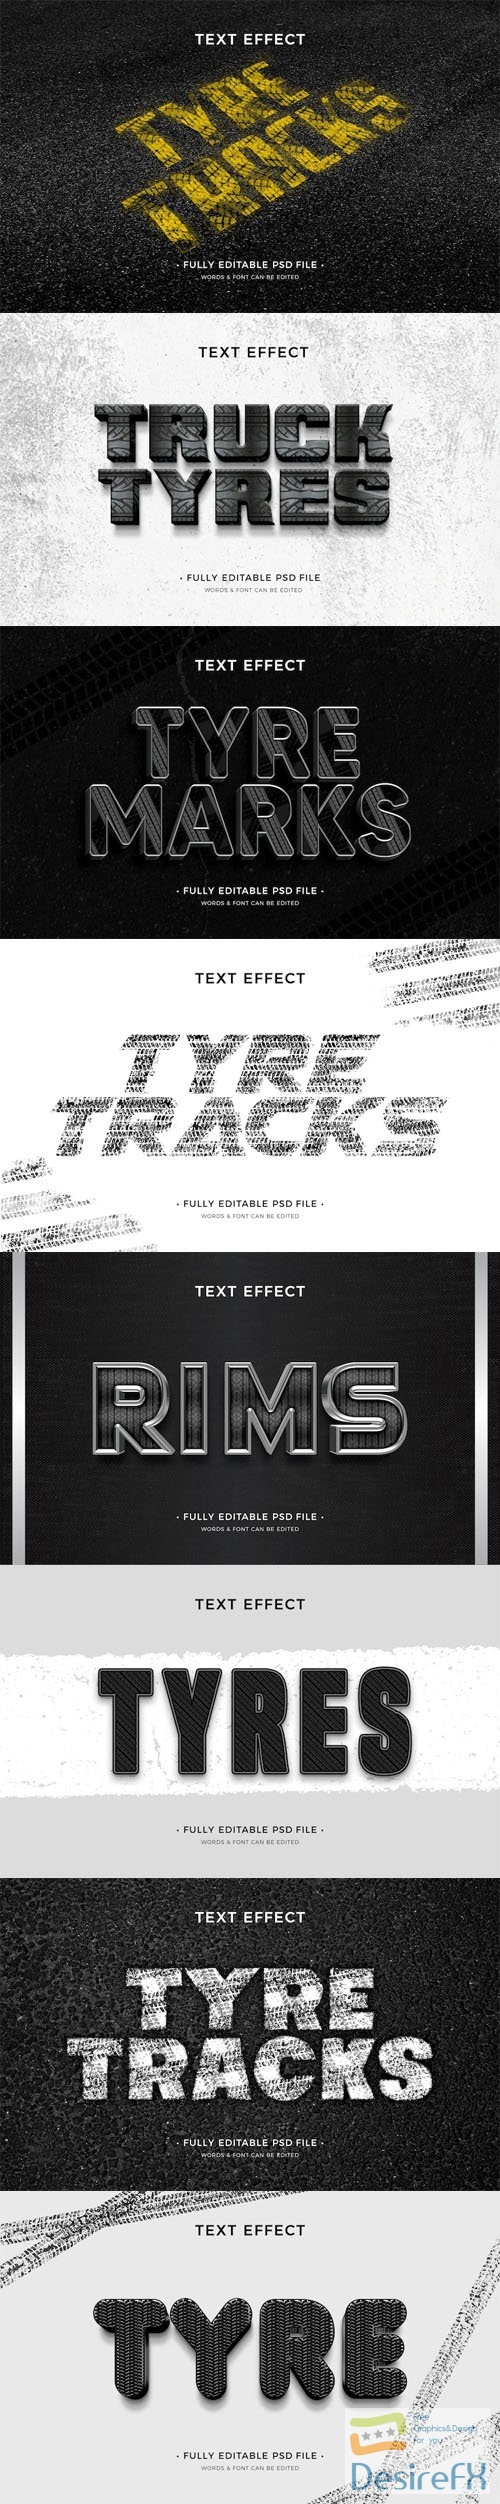 Tyres Text Effects Collection for Photoshop